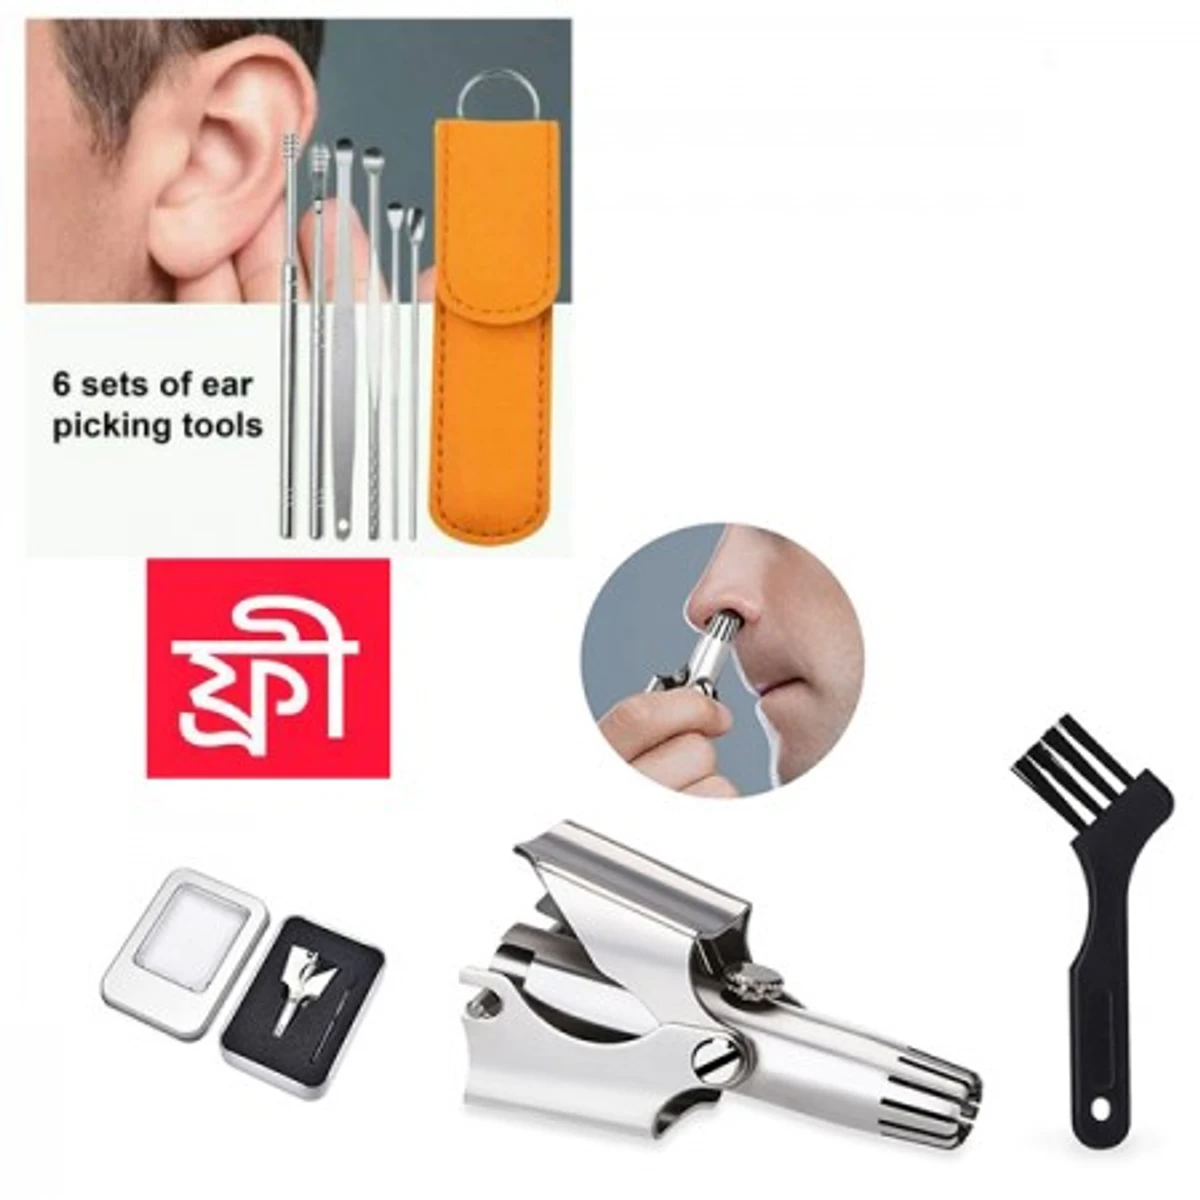 Free 6 Ear Cleaner set With Manual Nose Ear Hair Trimmer (Buy 1 Get 1 Free)